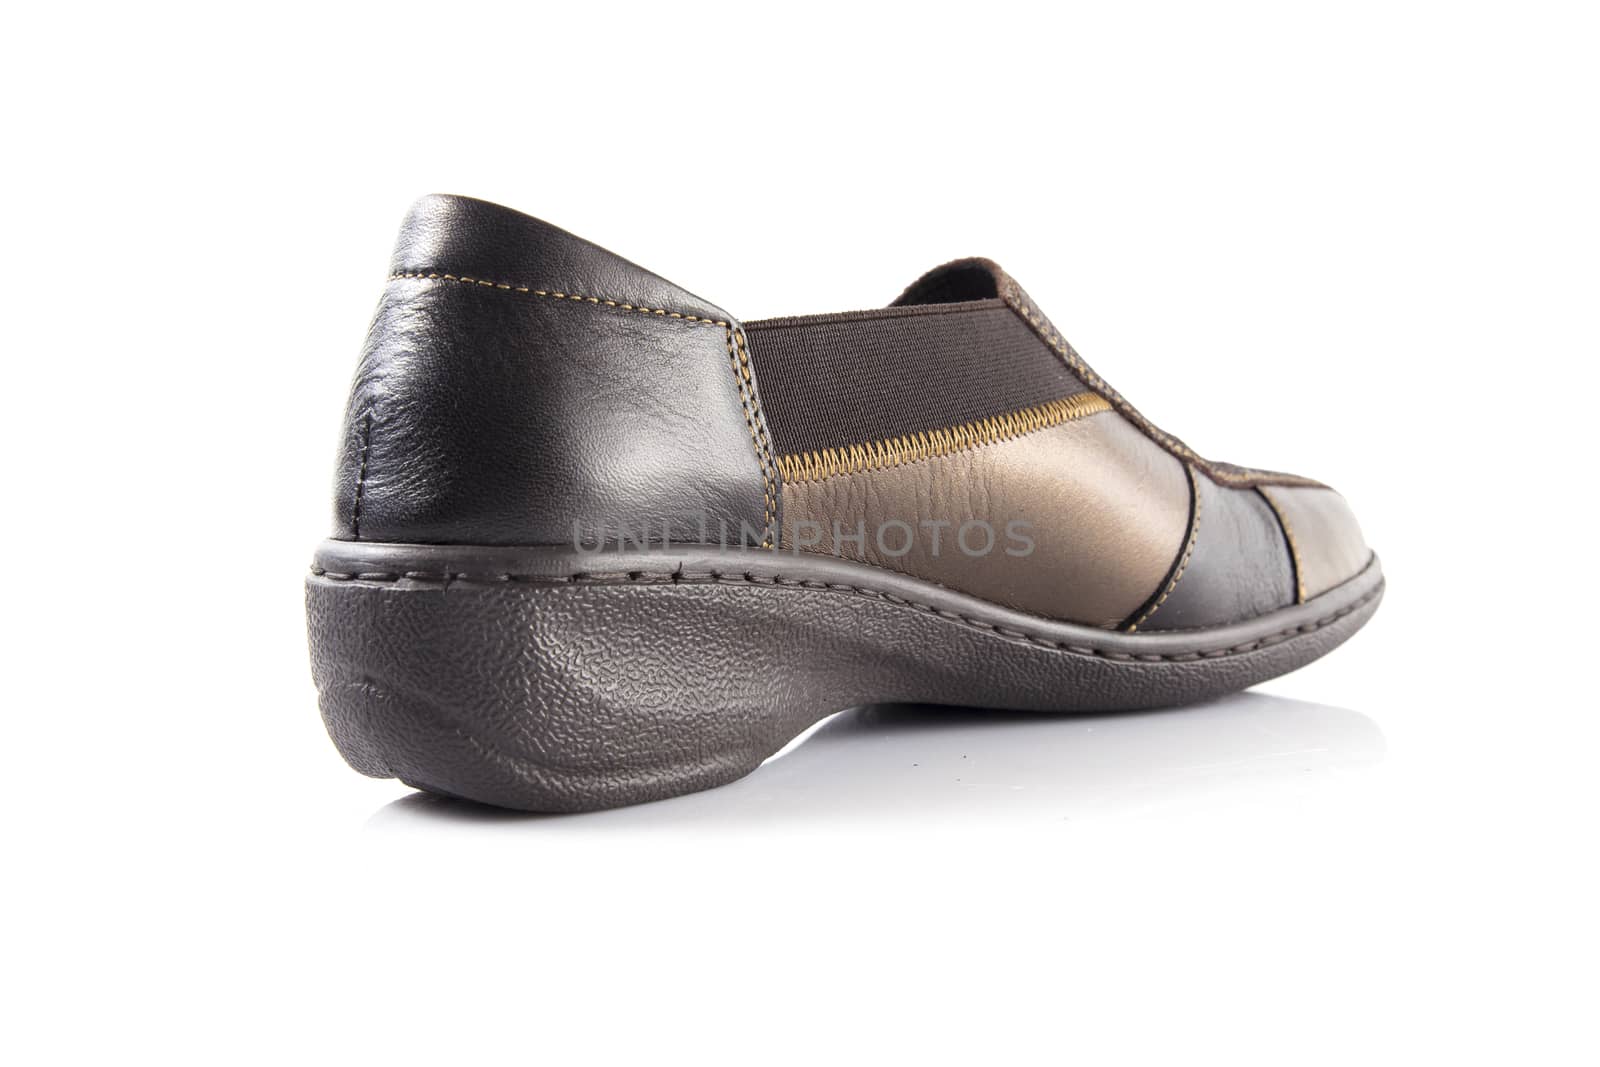 Brown leather shoes on white background, isolated product, top view.